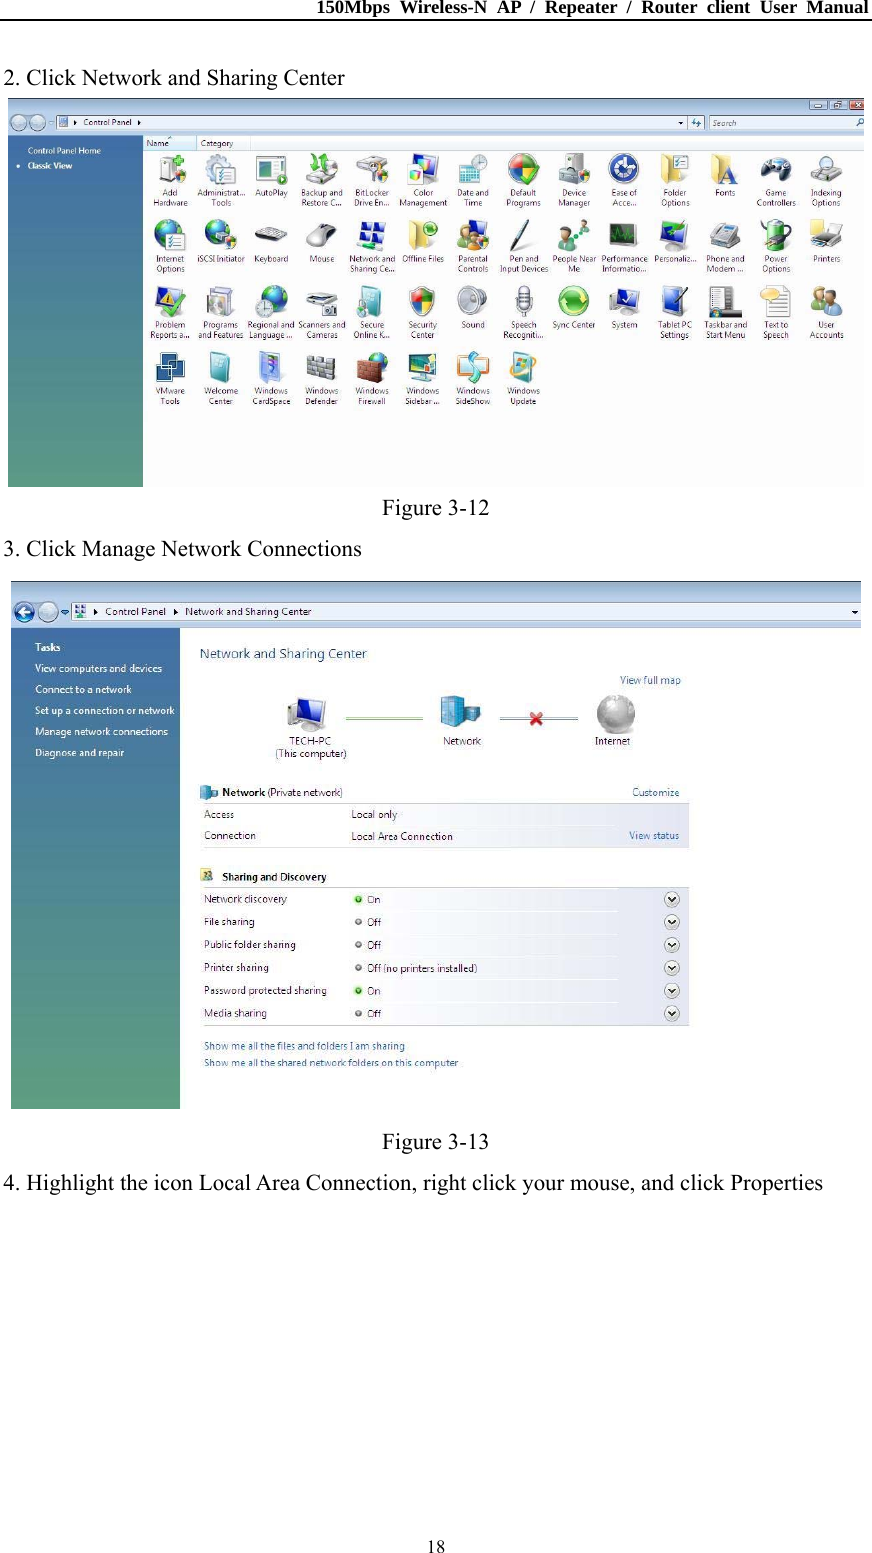 150Mbps Wireless-N AP / Repeater / Router client User Manual  182. Click Network and Sharing Center  Figure 3-12 3. Click Manage Network Connections  Figure 3-13 4. Highlight the icon Local Area Connection, right click your mouse, and click Properties 